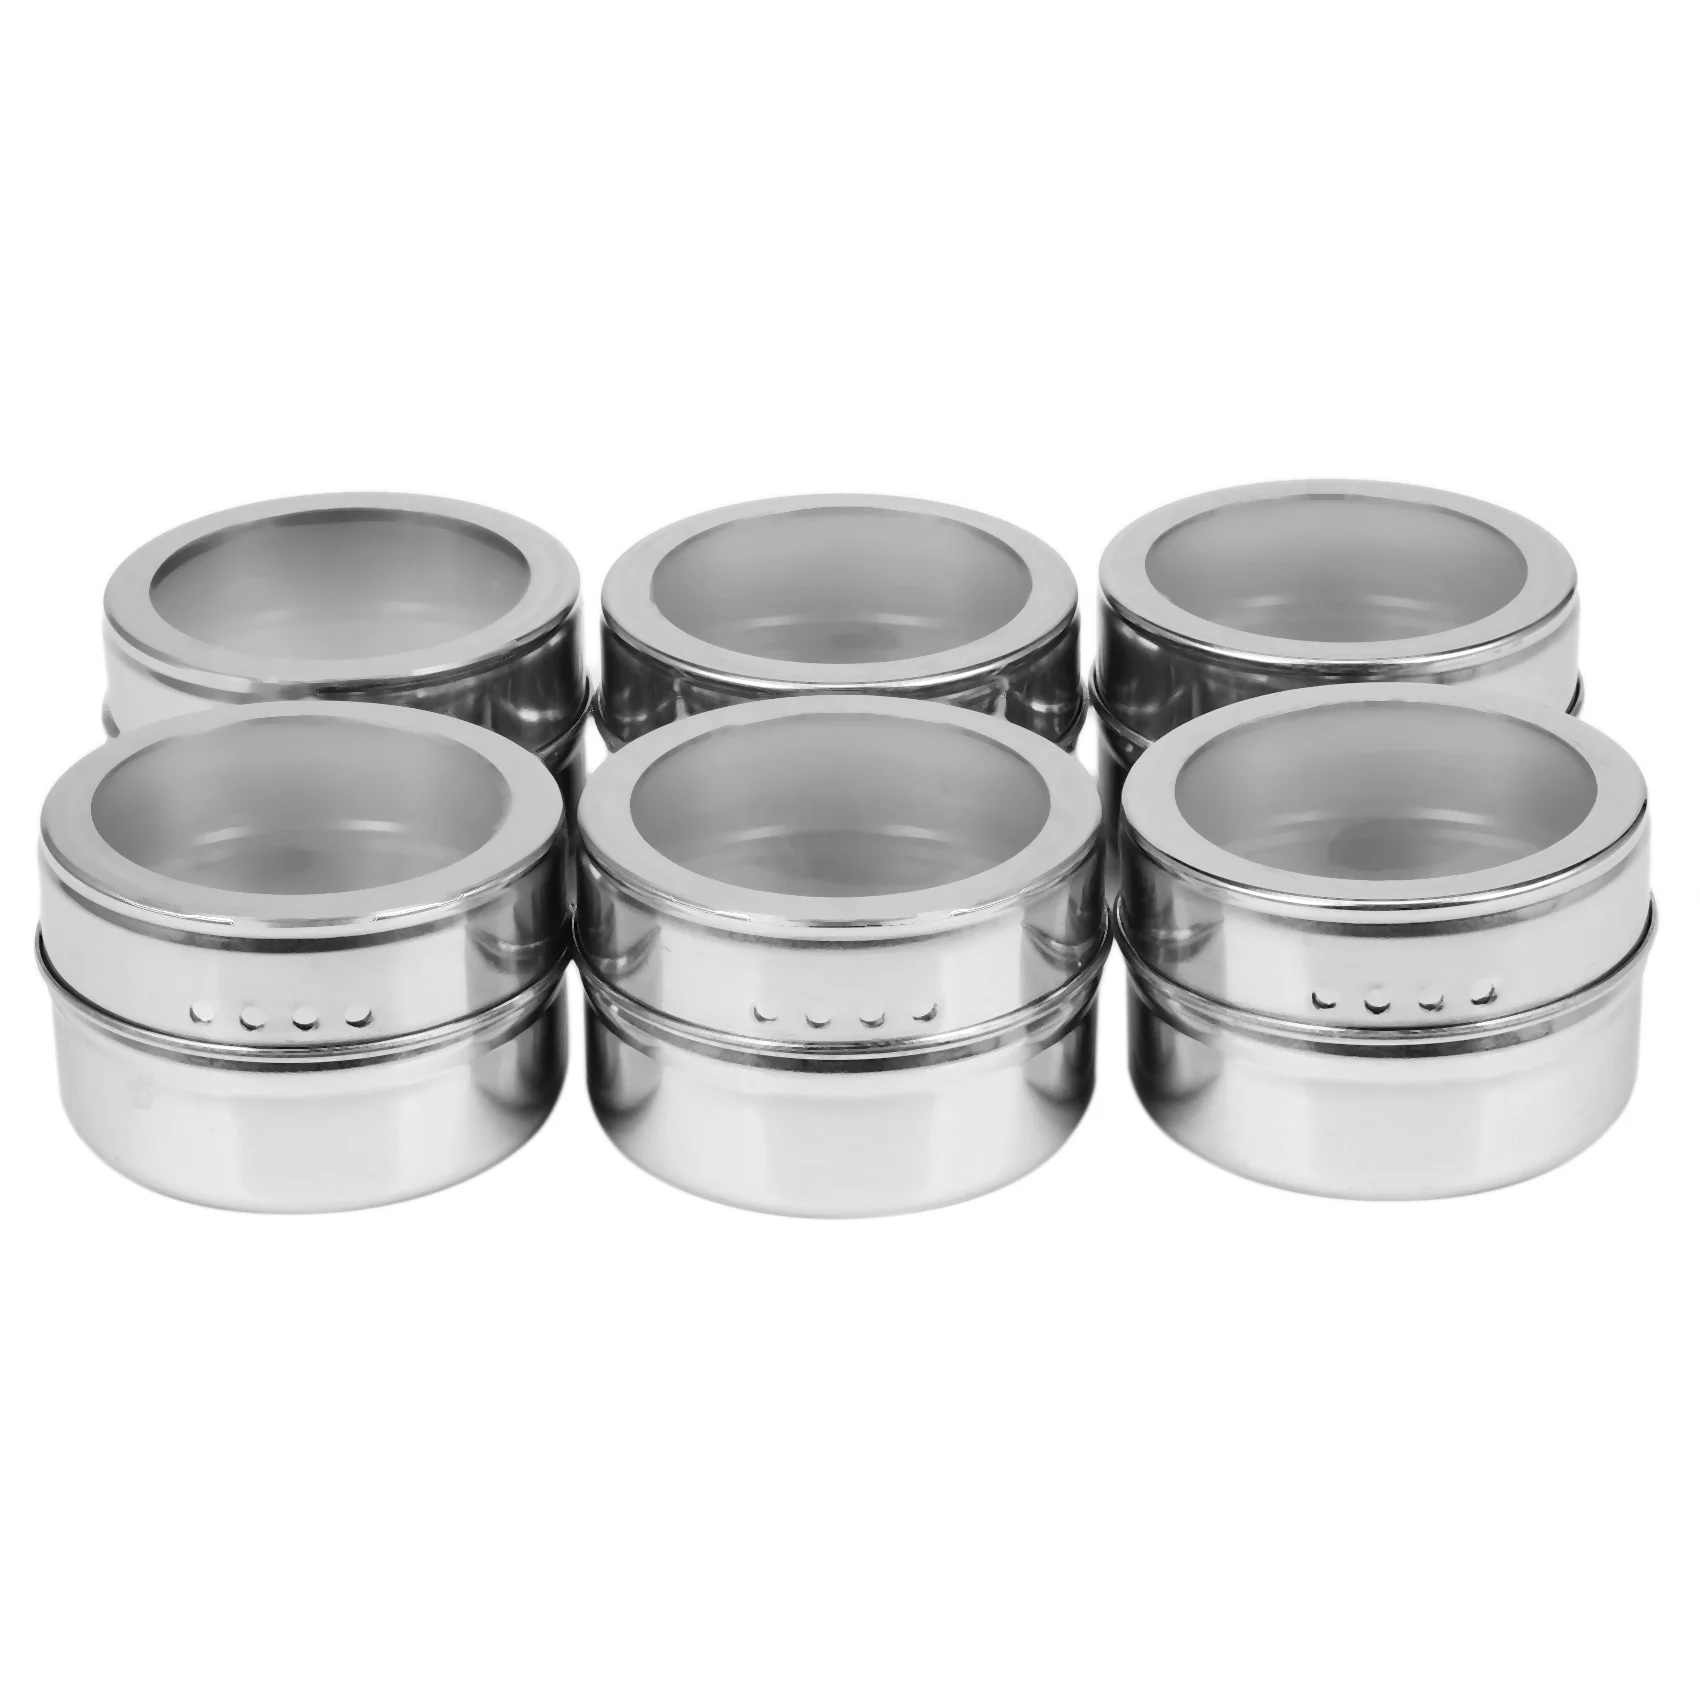 

6pcs / set Clear Lid Magnetic Spice Jar Stainless Steel Spice Sauce Storage Container Pots Kitchen Condiment Holder Houseware